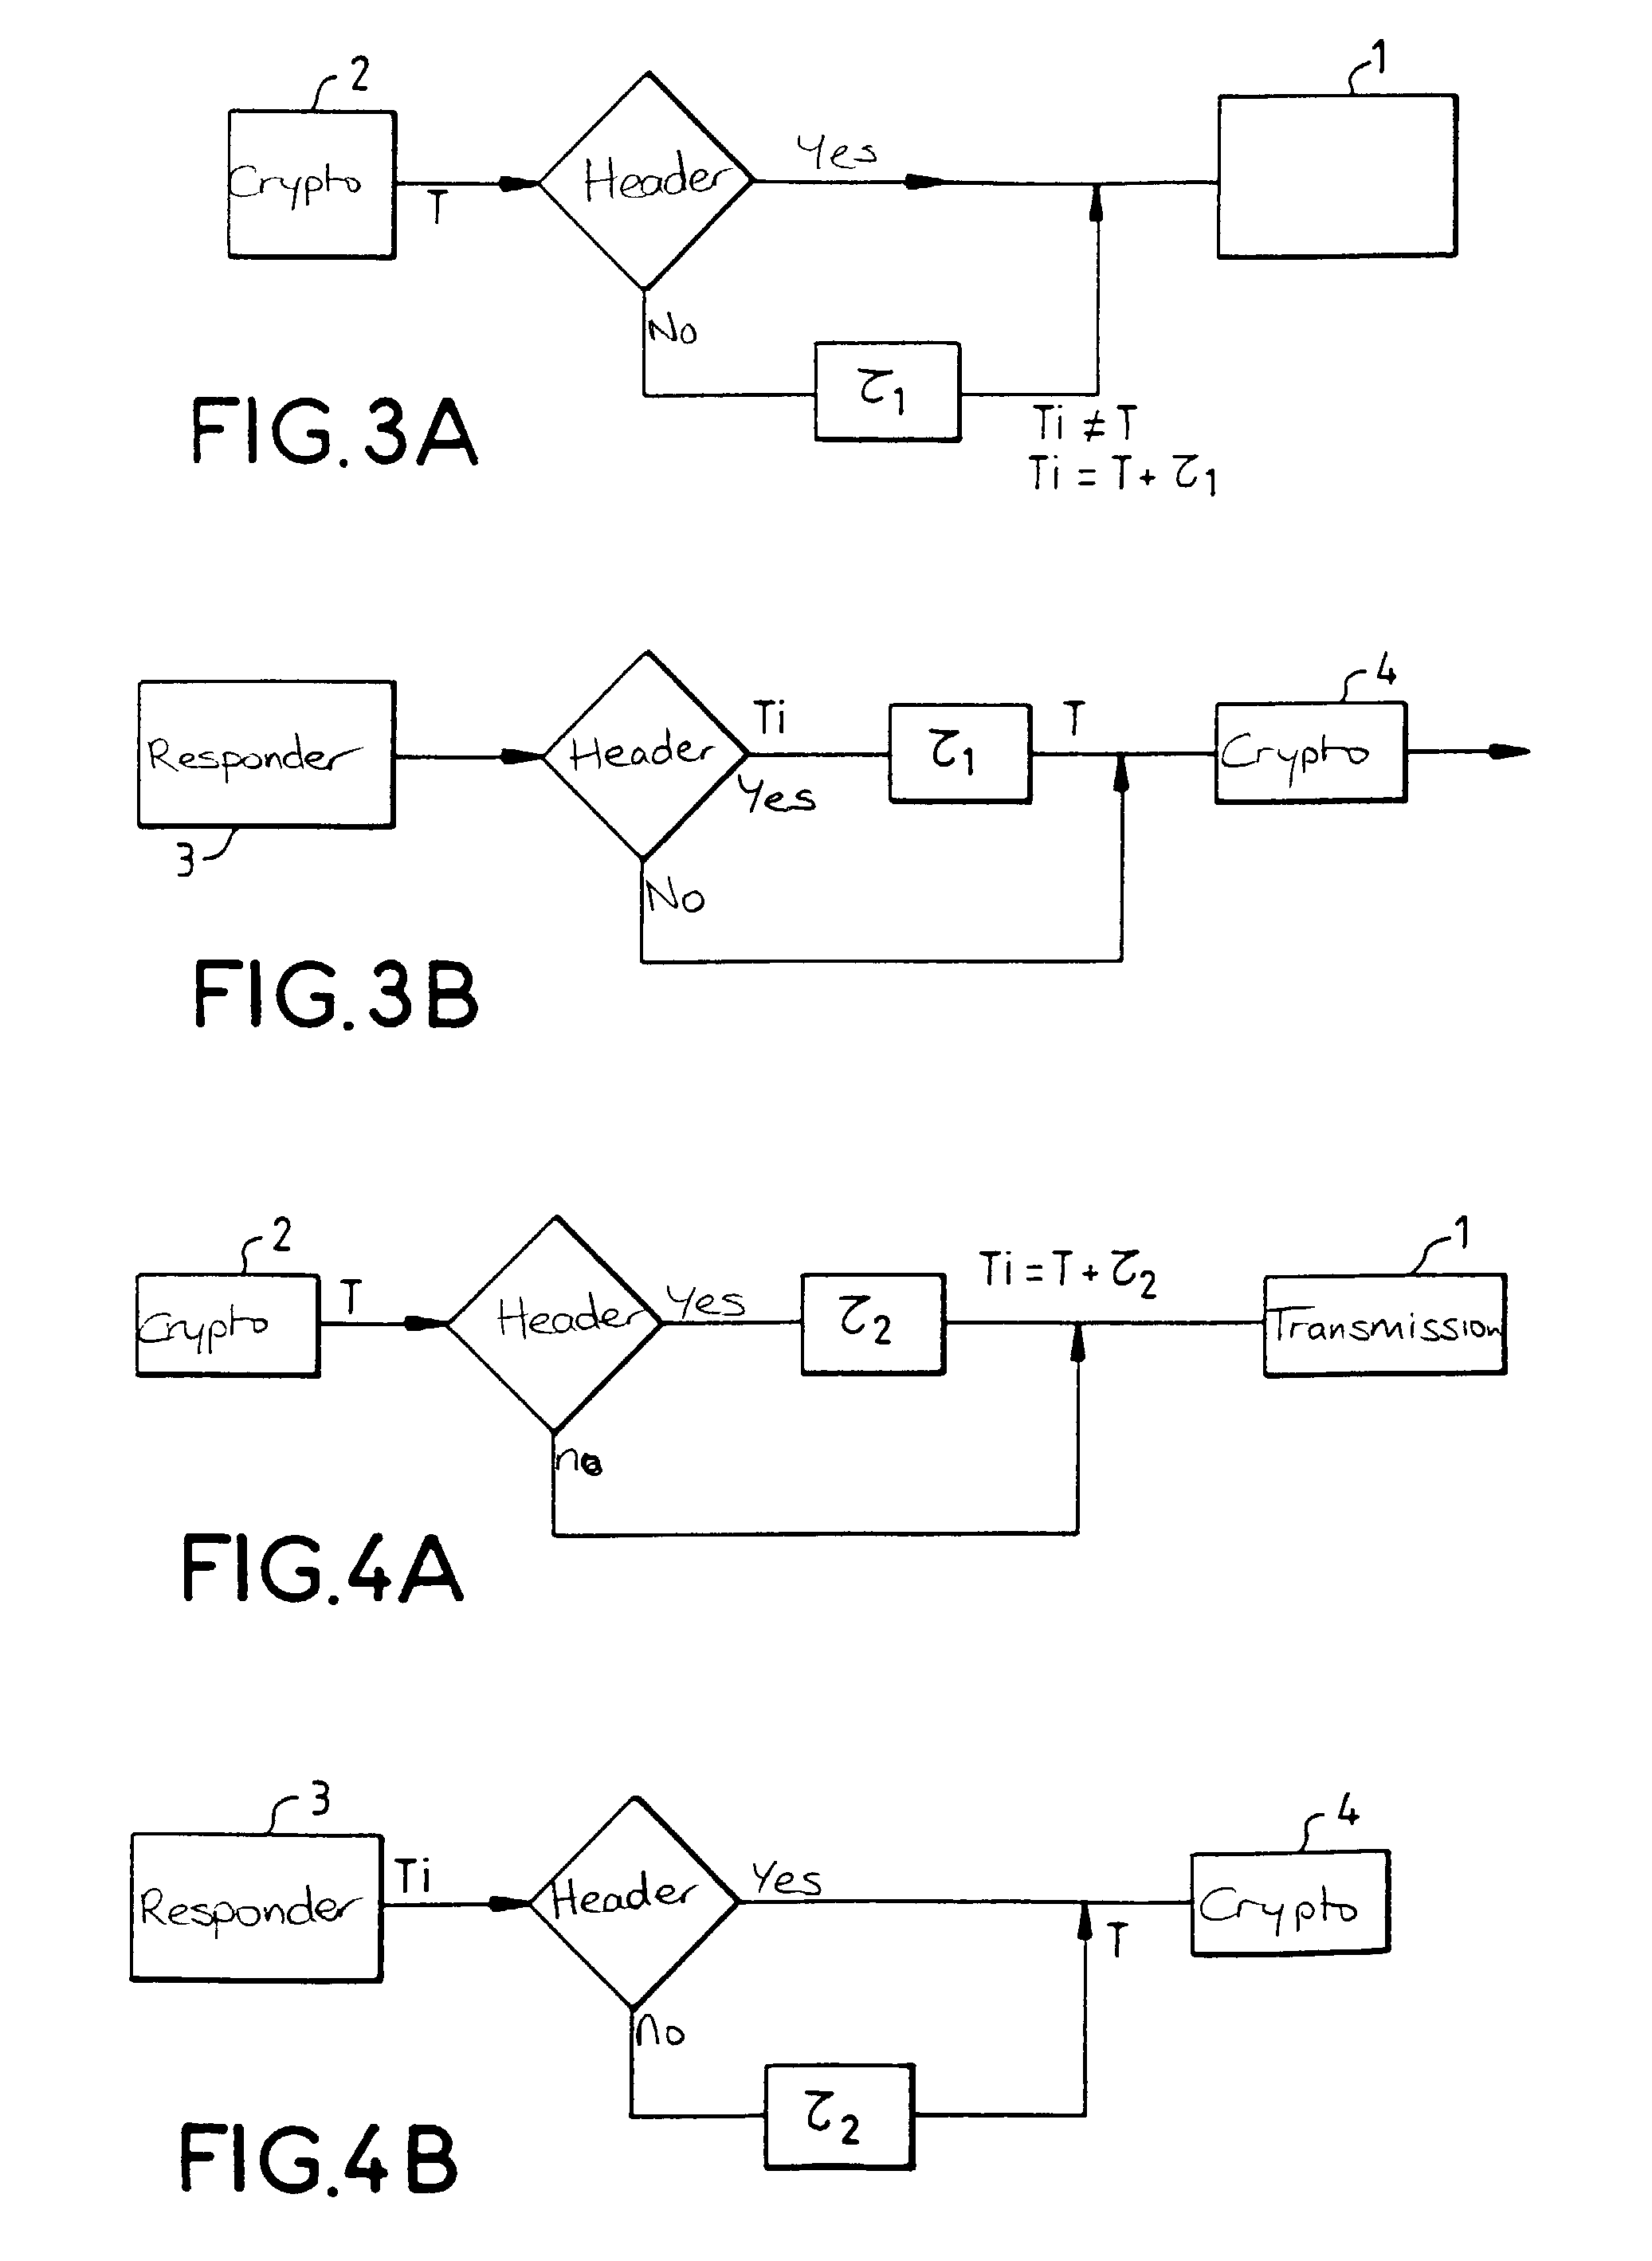 Method and device for the prevention of disparities or error messages and false responses in IFF type systems